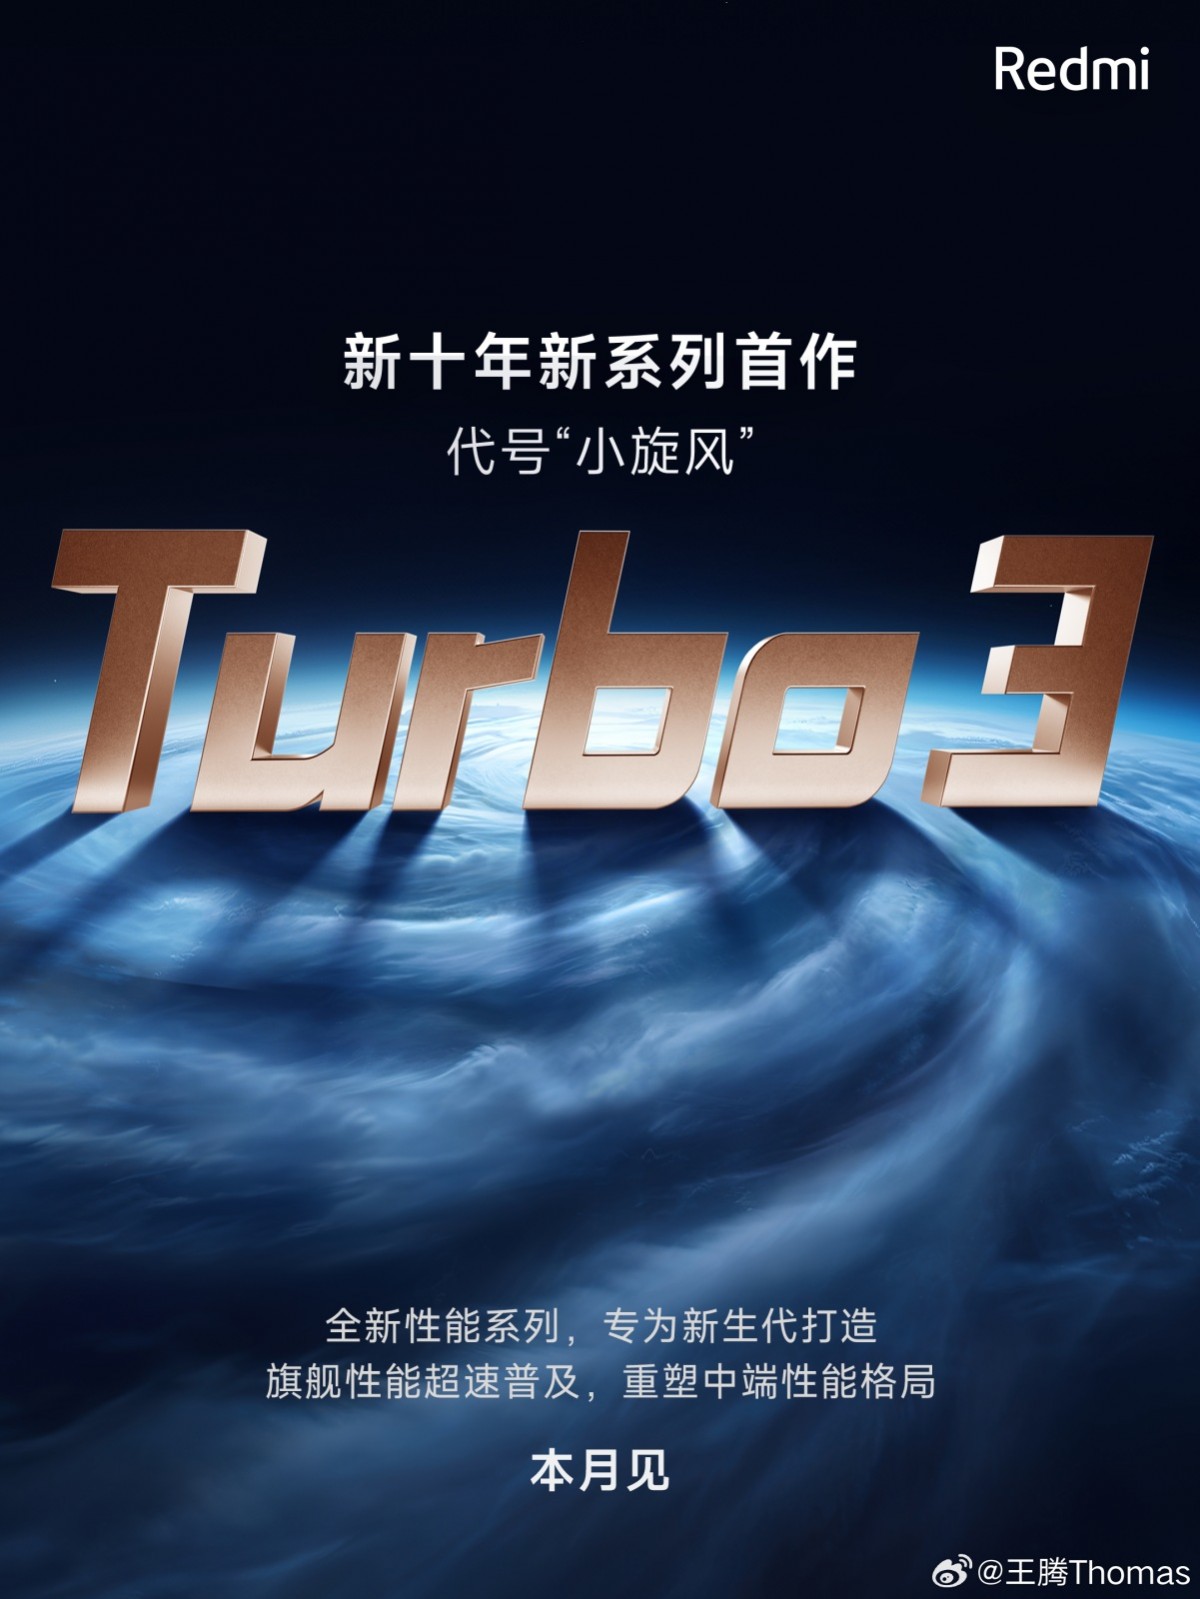 Xiaomi Unveils Turbo 3 as the Latest Addition to Its High-Performance Flagship Series